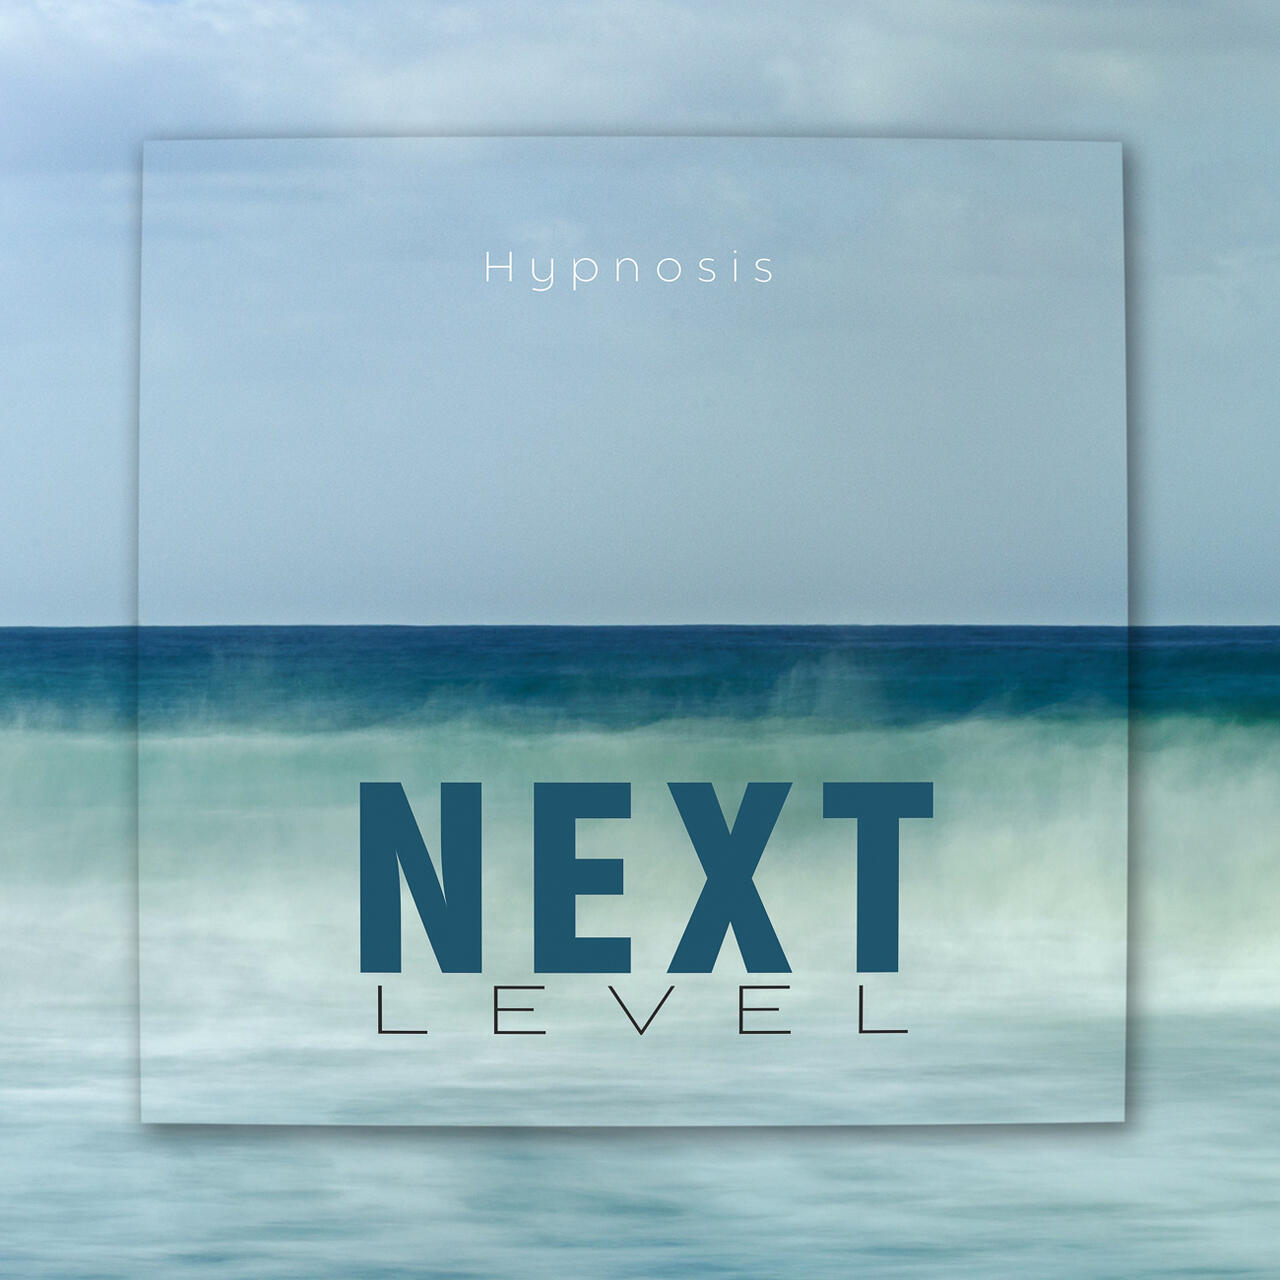 Next Level by Hypnosis print